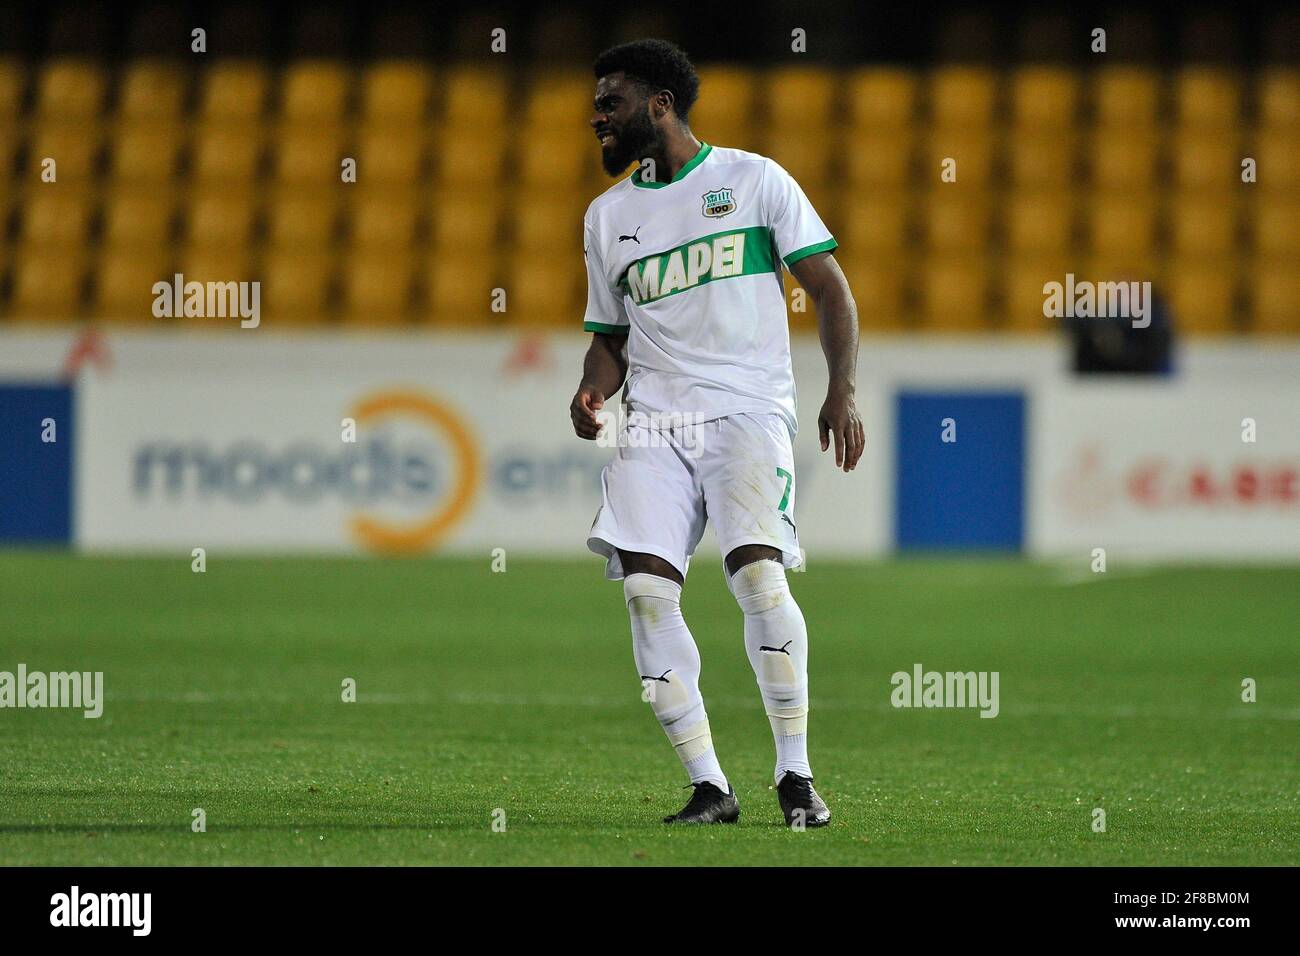 Jeremie Boga player of Sassuolo, during the match of the Italian football league Serie A between Benevento vs Sassuolo final result 0-1, match played Stock Photo